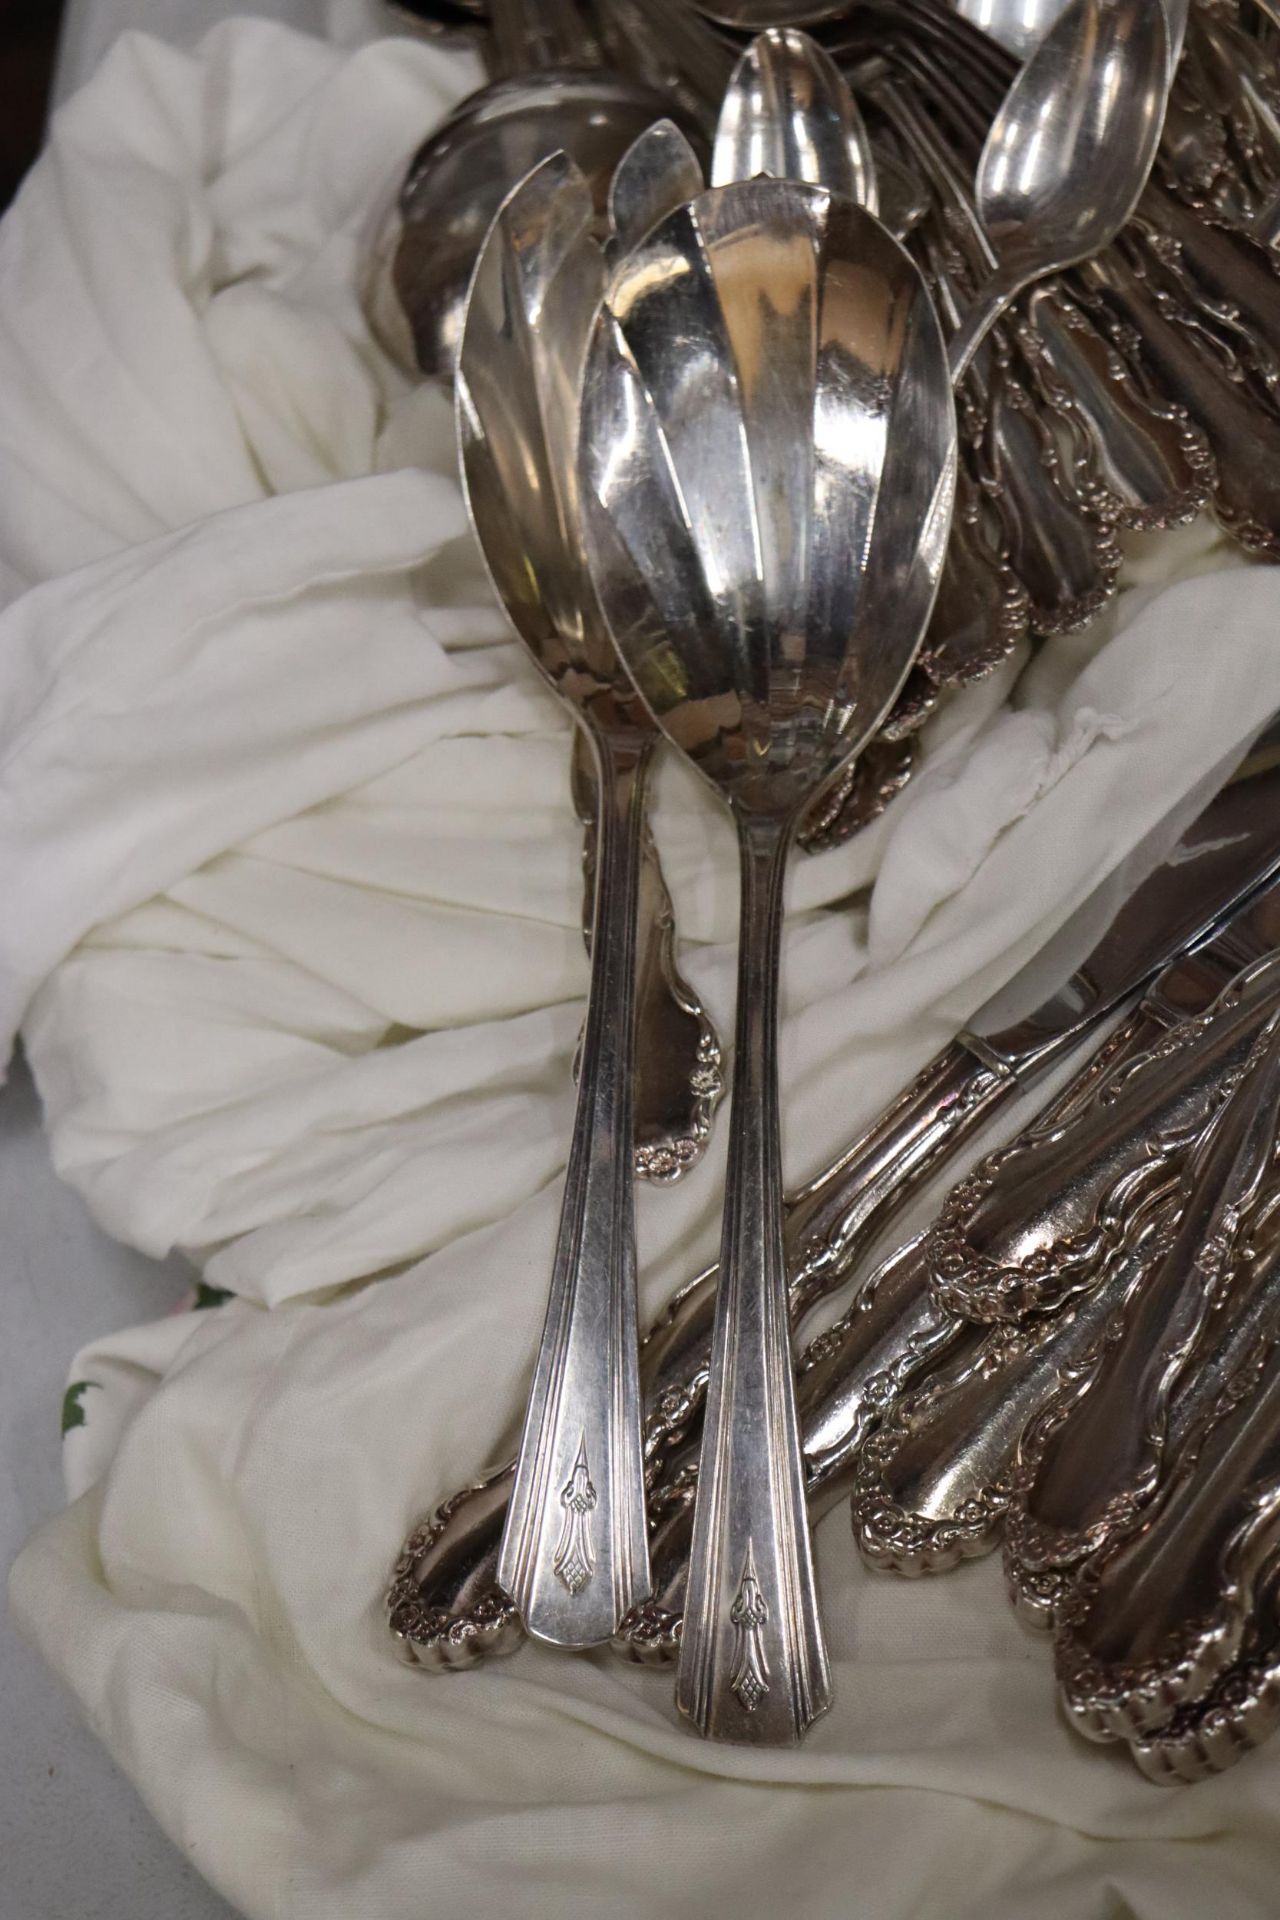 A QUANTITY OF FLATWARE, KNIVES, FORKS AND SPOONS - Image 4 of 9